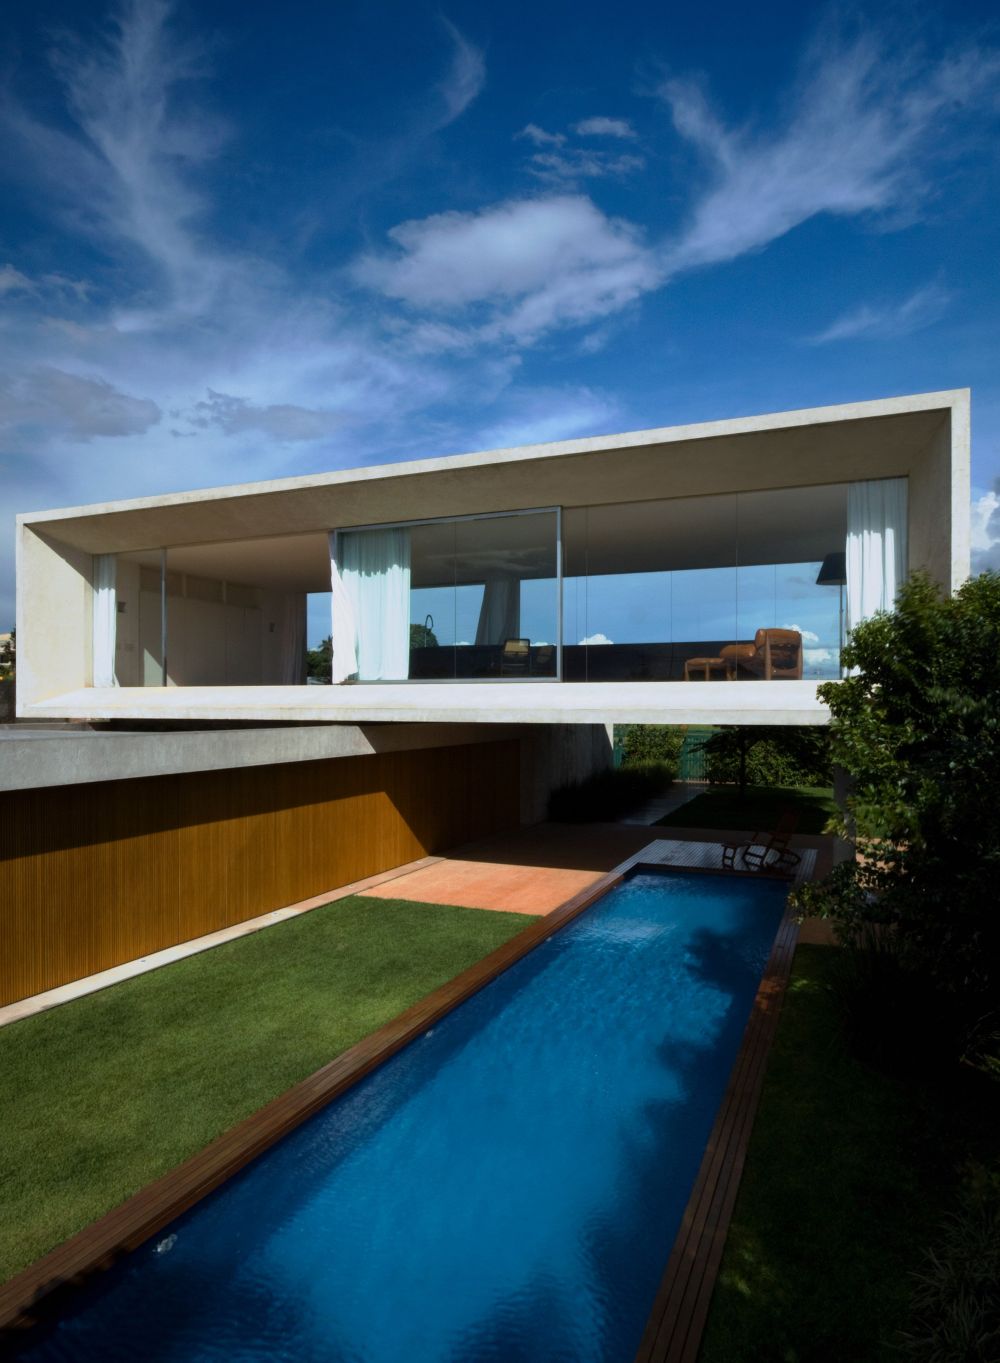 The top volume has glazed sides and hovers over a lap pool, being suspended on stilts